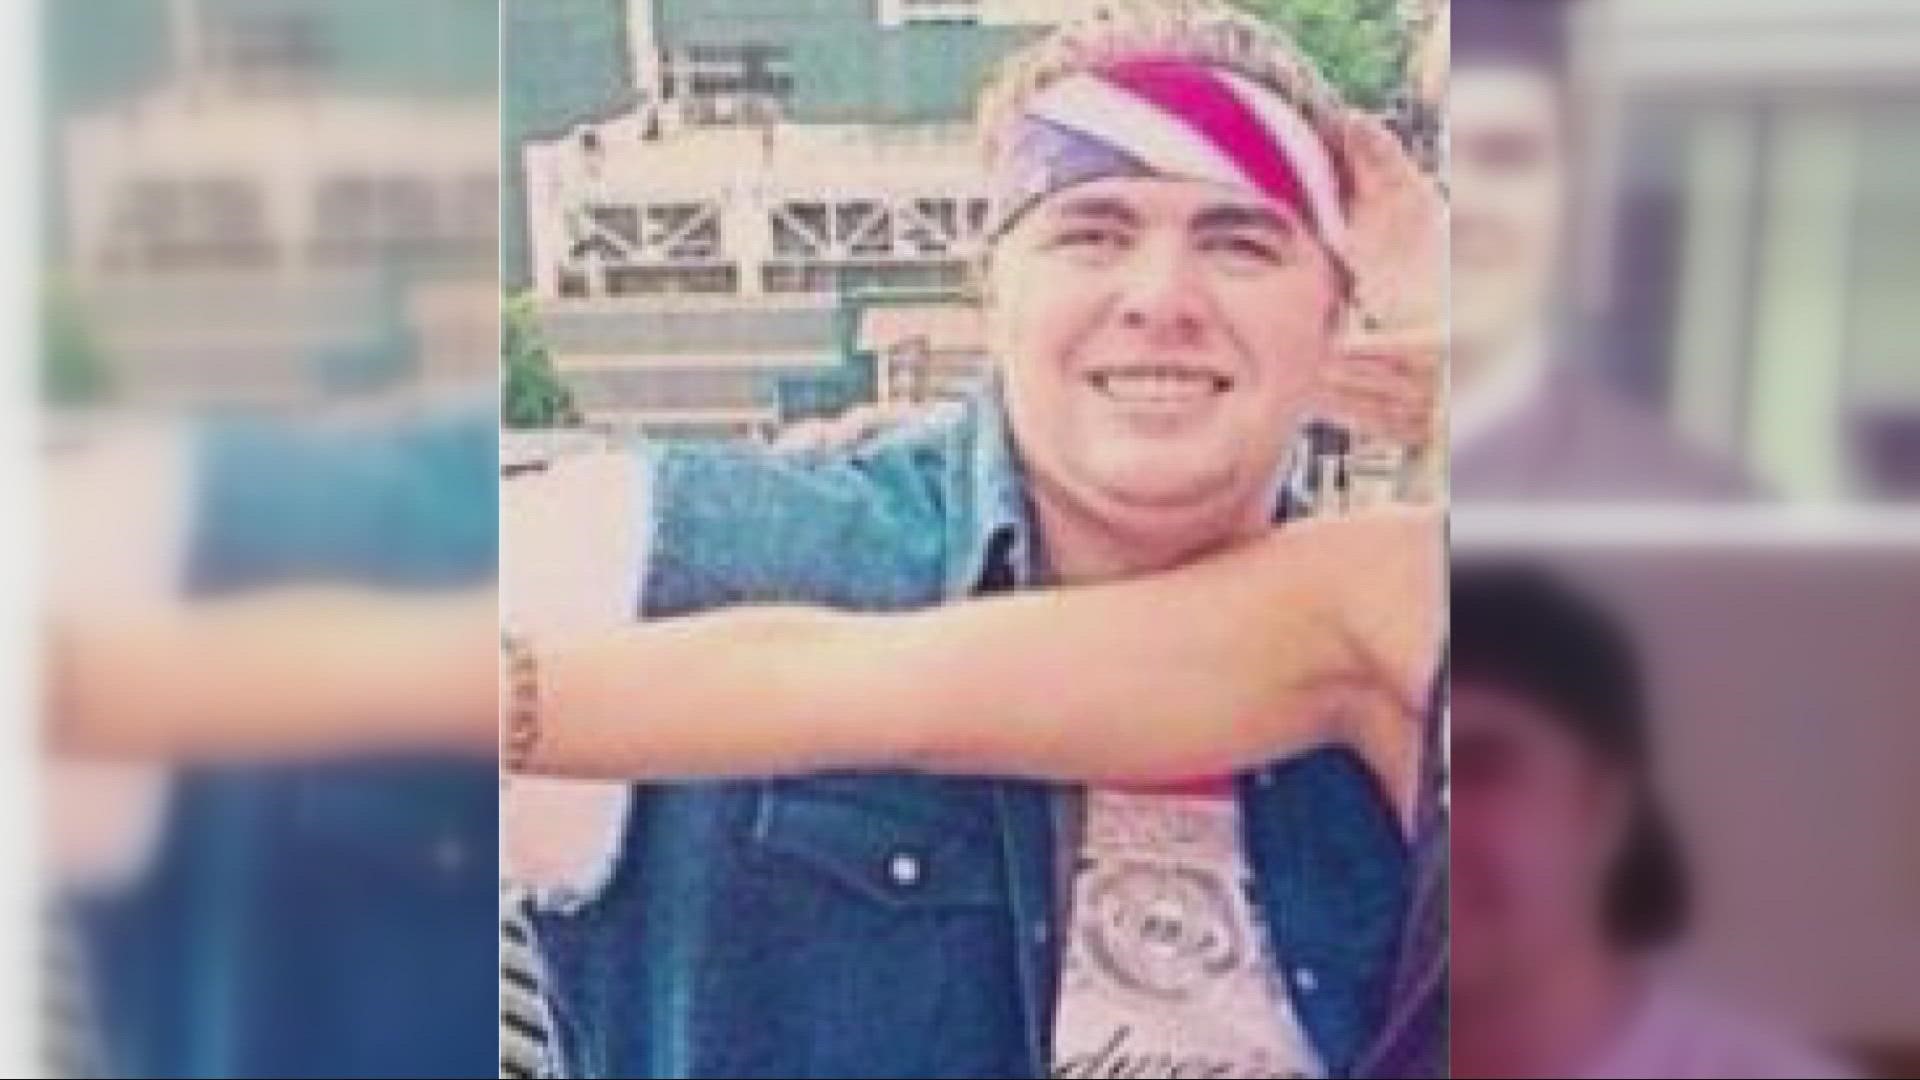 In 2014, Cory Barron died while attending a concert at Progressive Field. His manner of death was undetermined. Now, it has been changed to homicide.